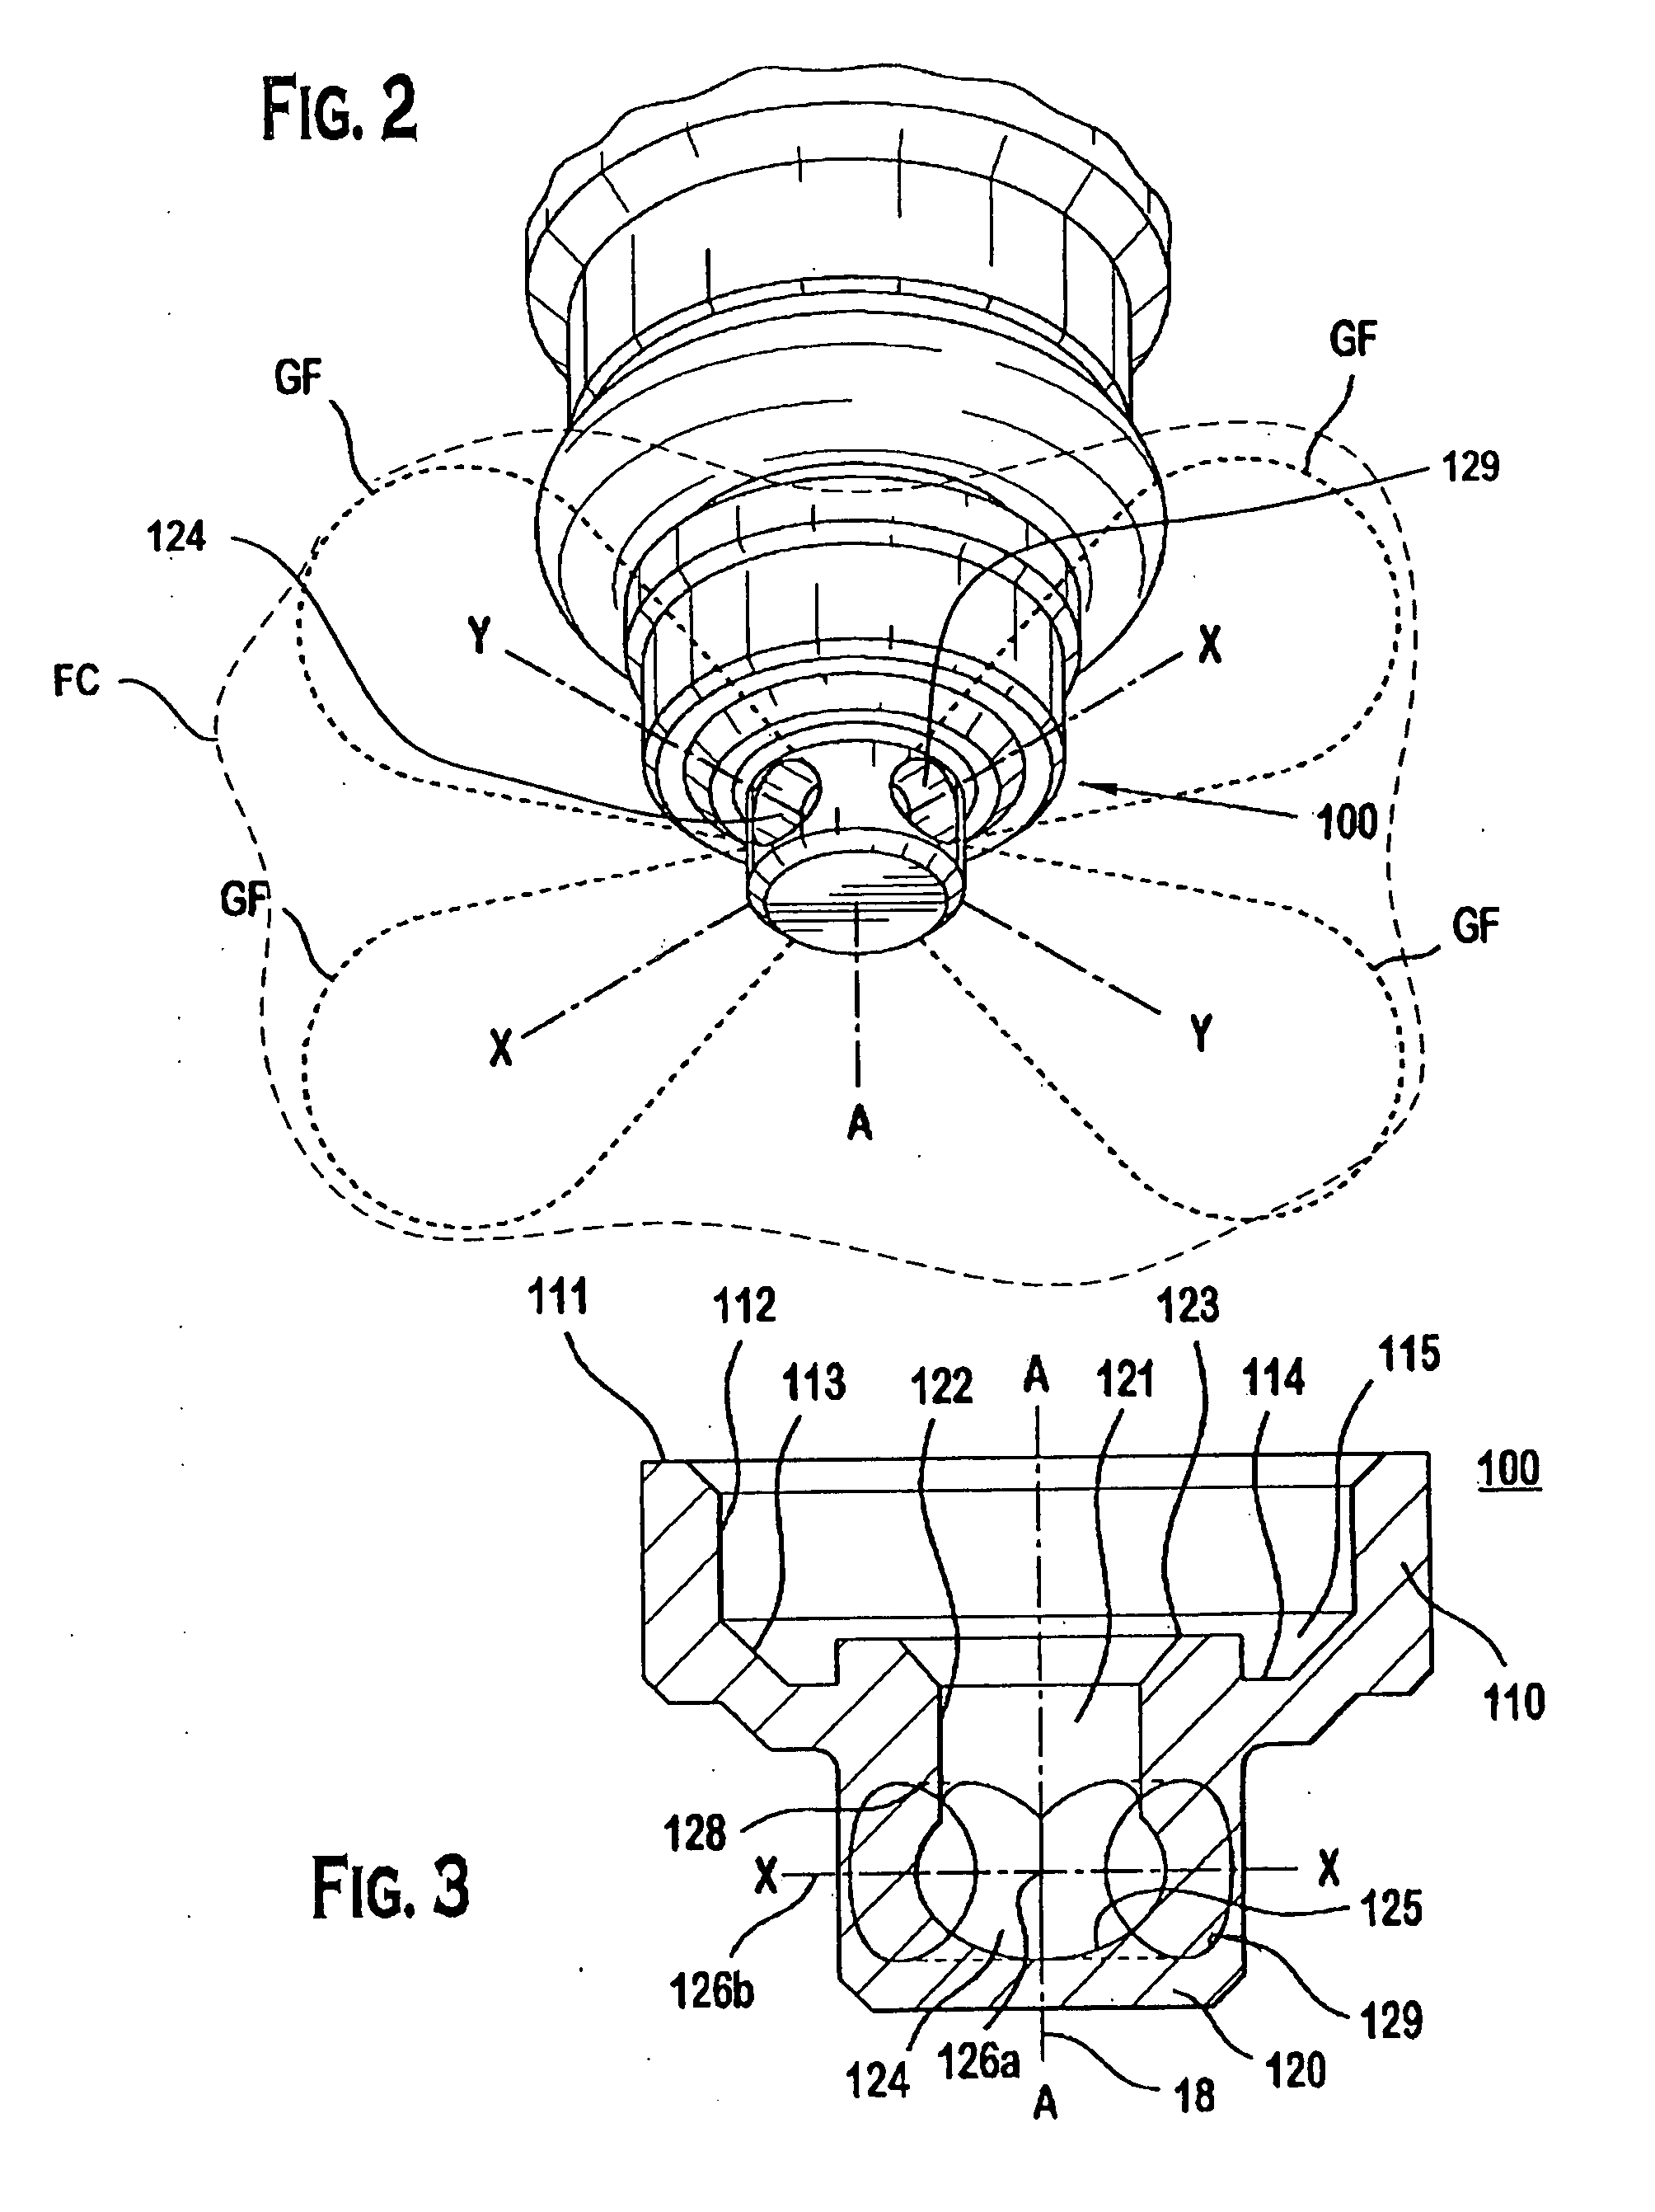 Fuel injector having an external cross-flow nozzle for enhanced compressed natural gas jet spray